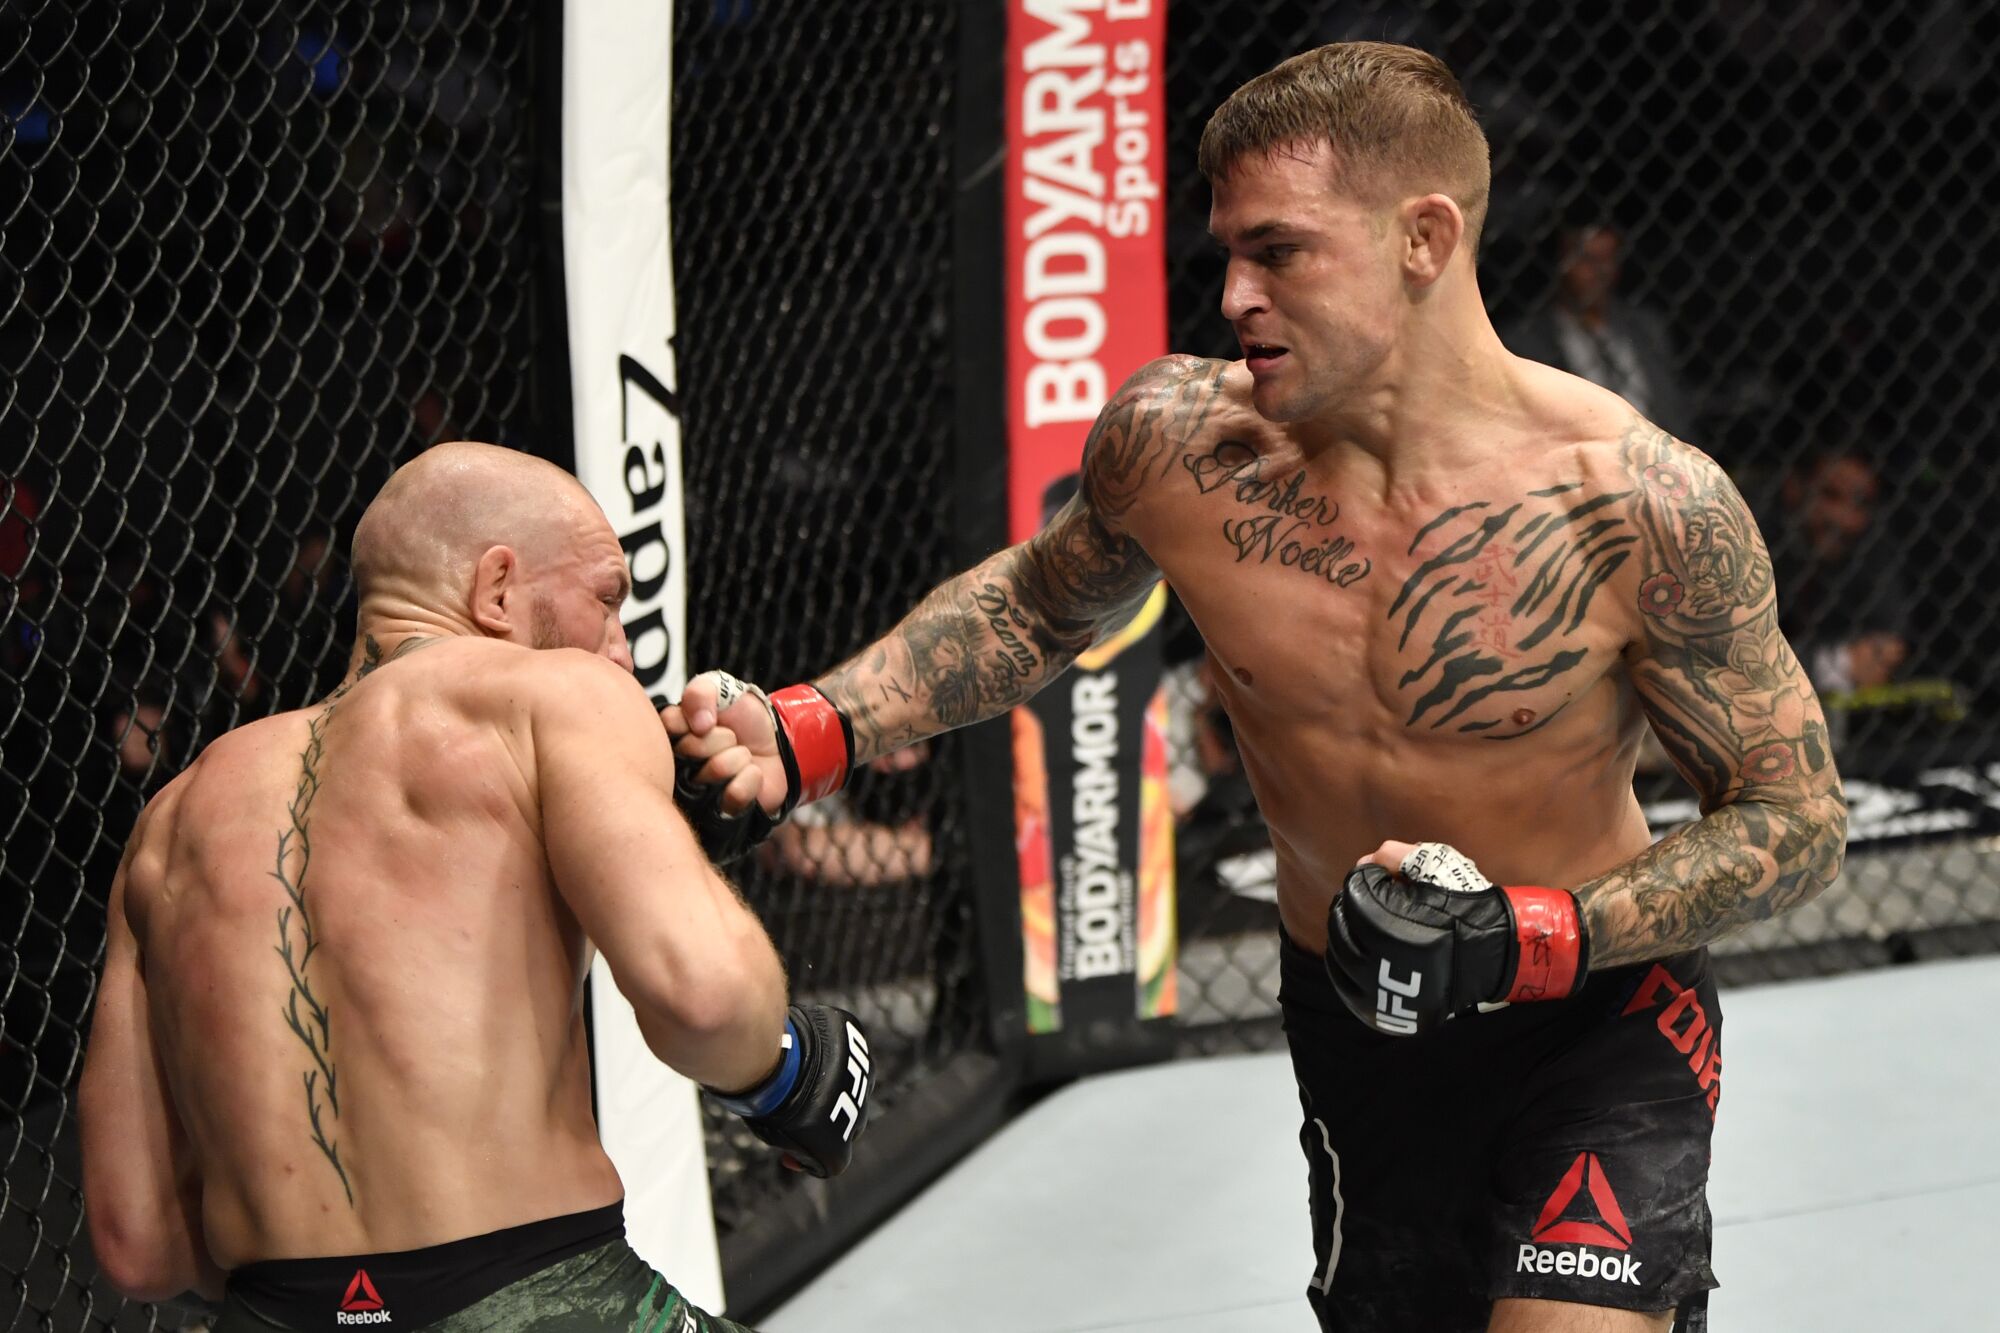 Dustin Poirier punches Conor McGregor during their lightweight fight at UFC 257 in Abu Dhabi on Saturday.